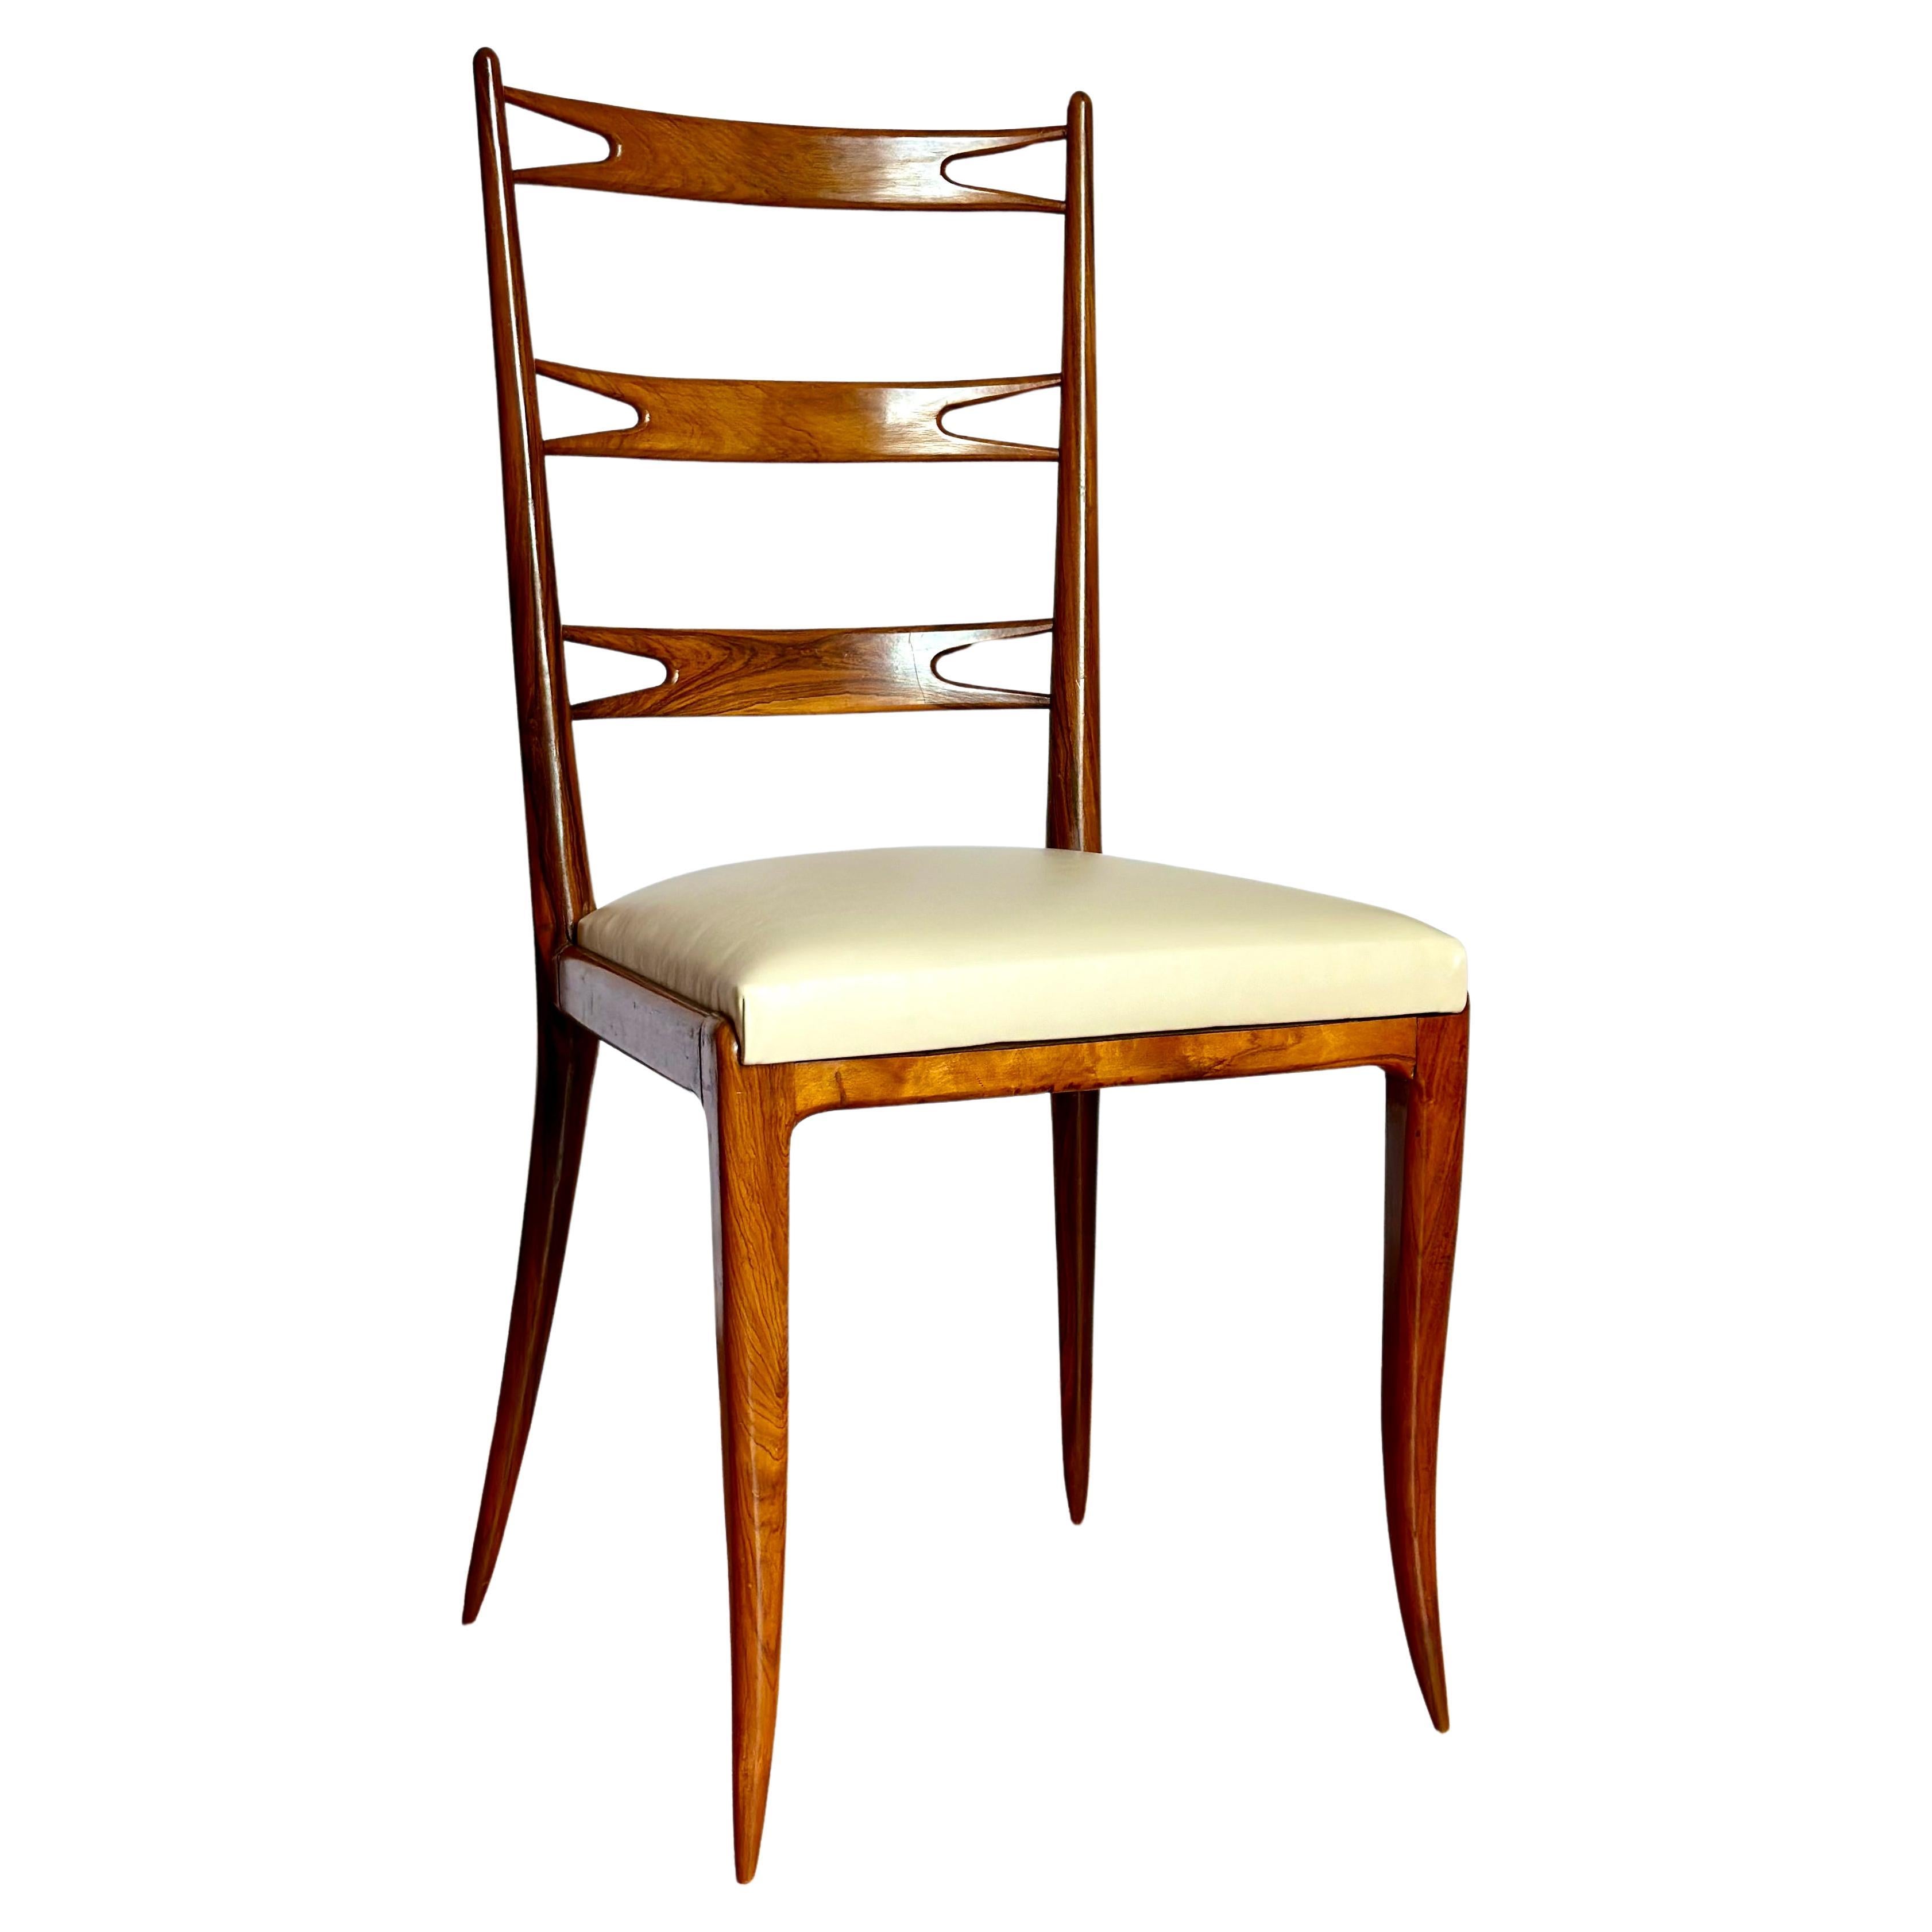 Giuseppe Scapinelli Brazilian Modern Chair in Caviuna Rosewood and Leather For Sale